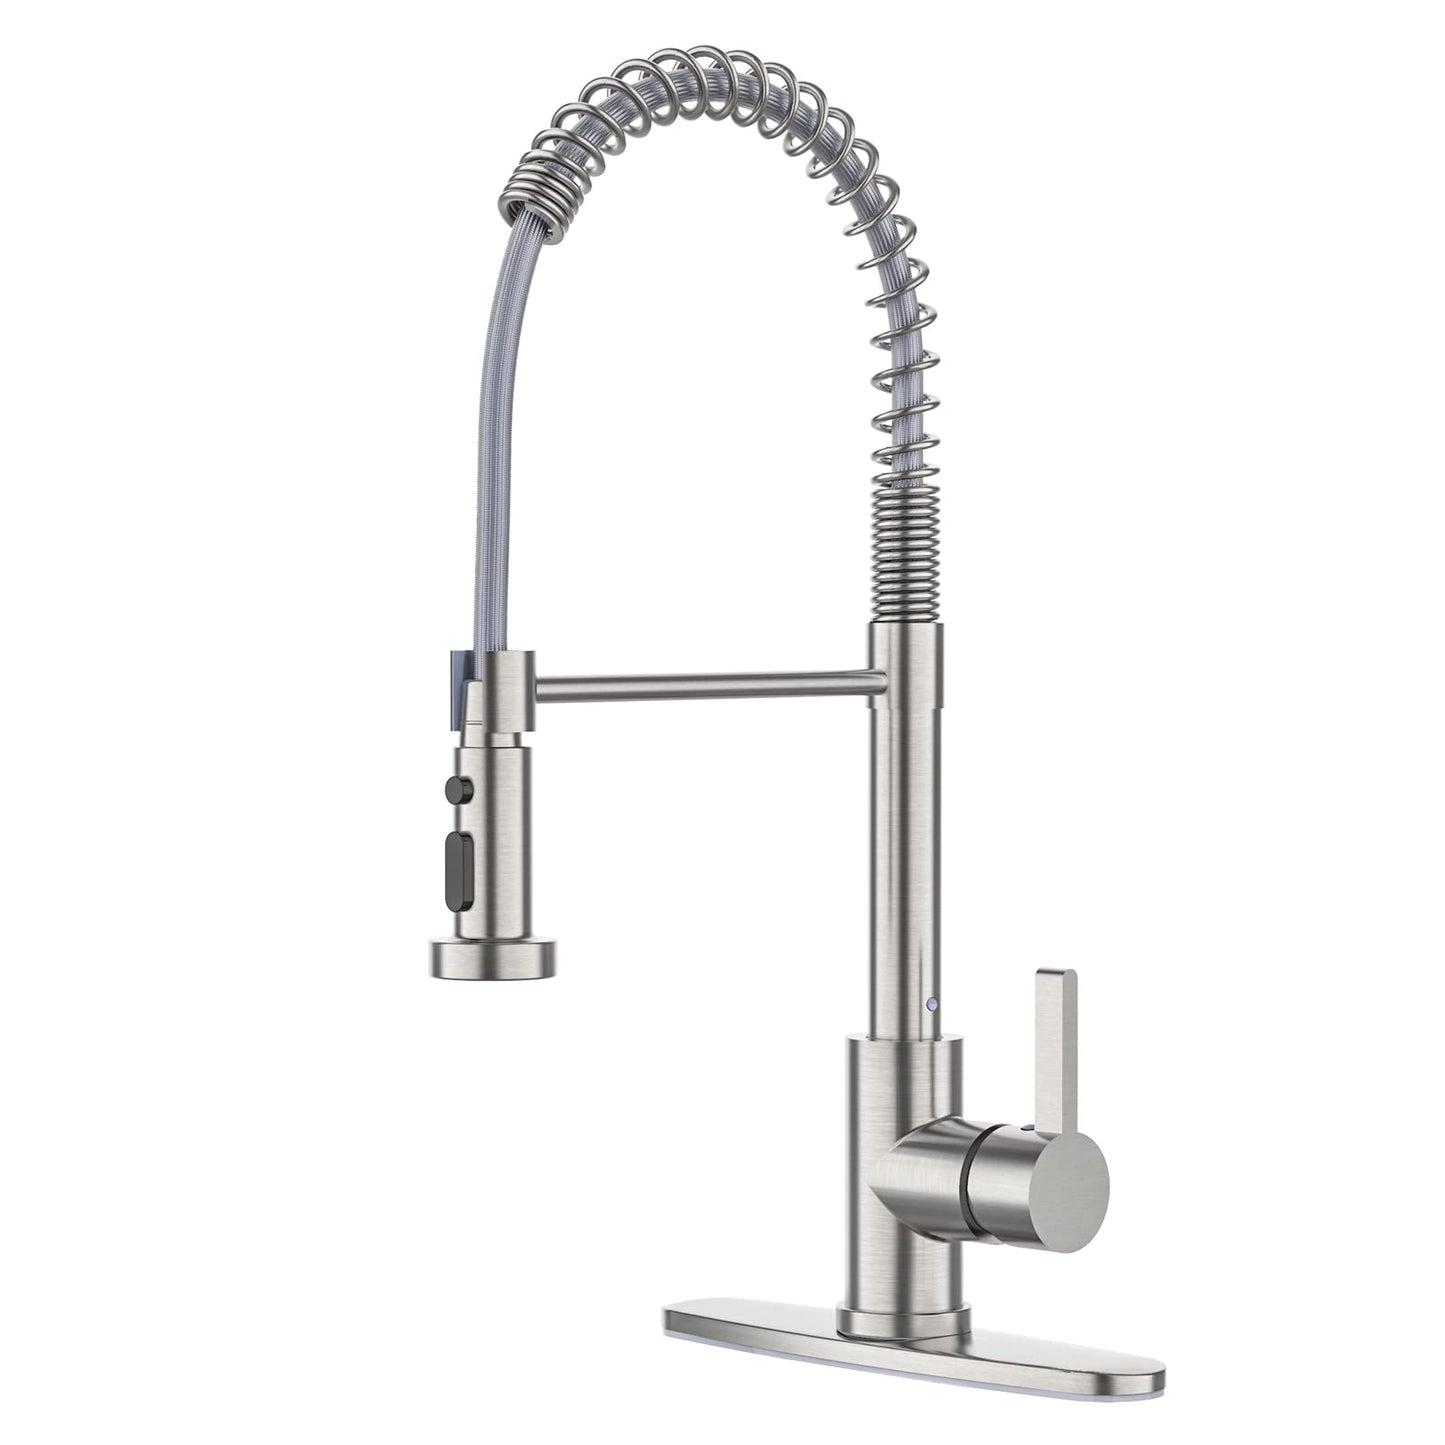 GARVEE Kitchen Faucet With Pull Down Sprayer Spring Sink Faucets